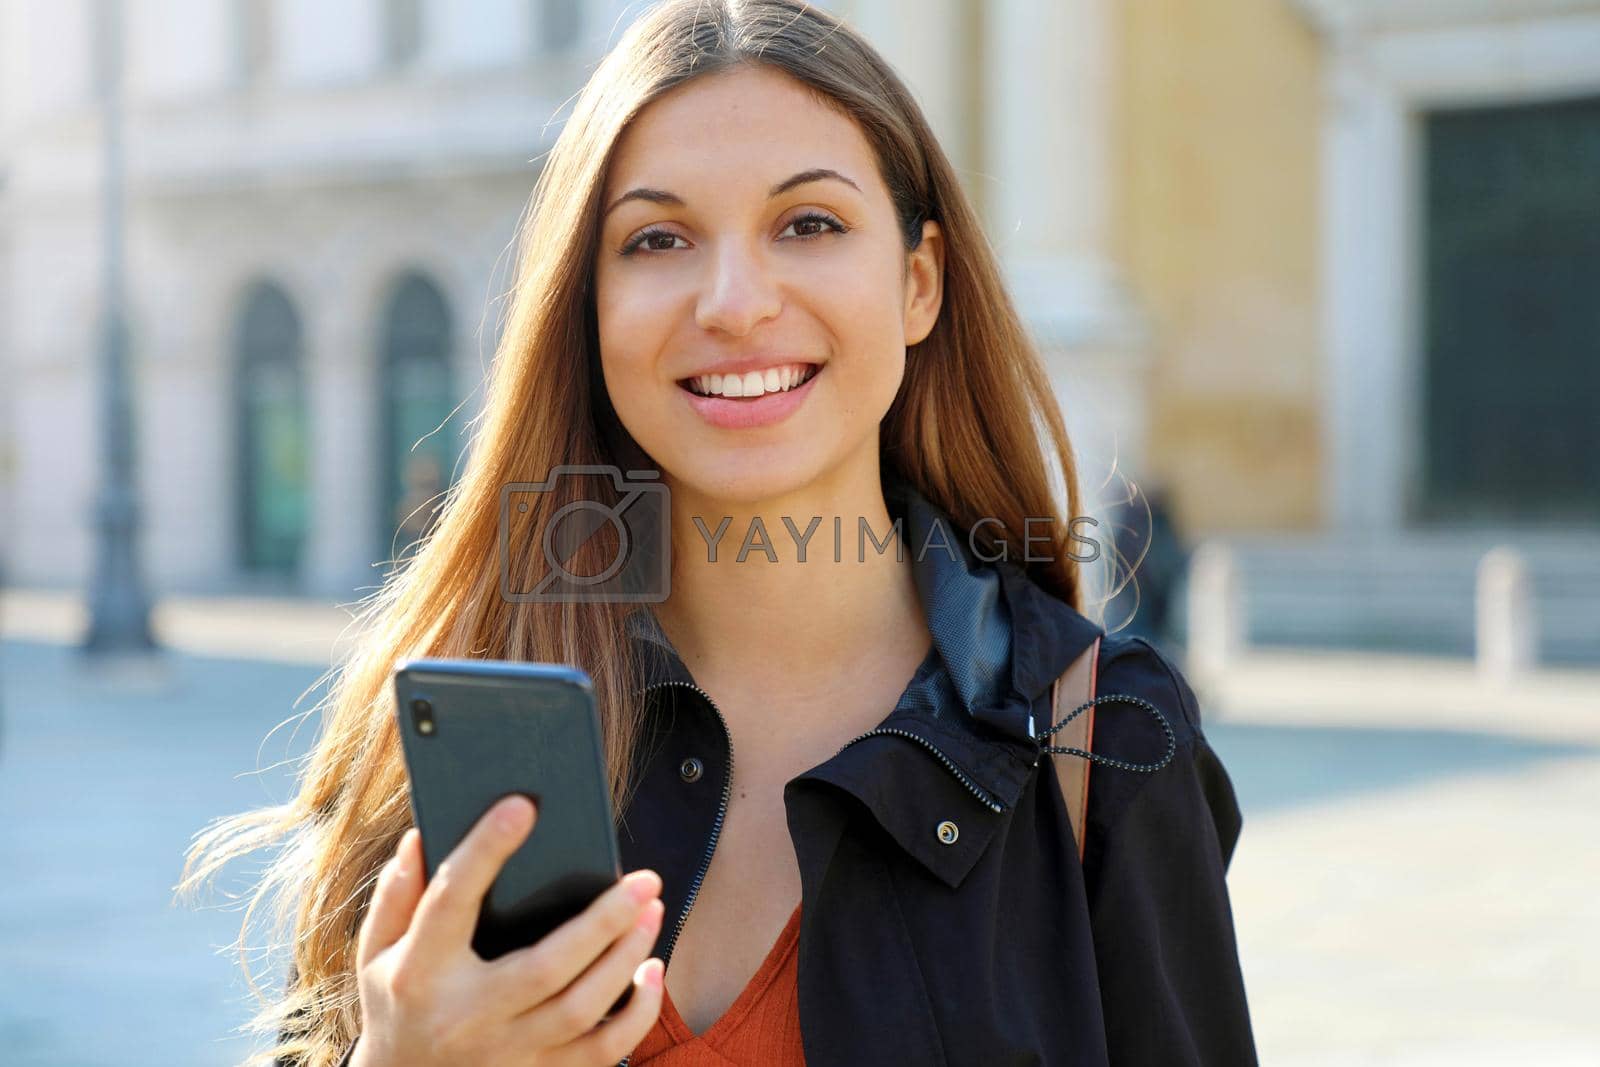 Royalty free image of Brazilian bright cheerful student girl holding smart phone and looks at camera by sergio_monti